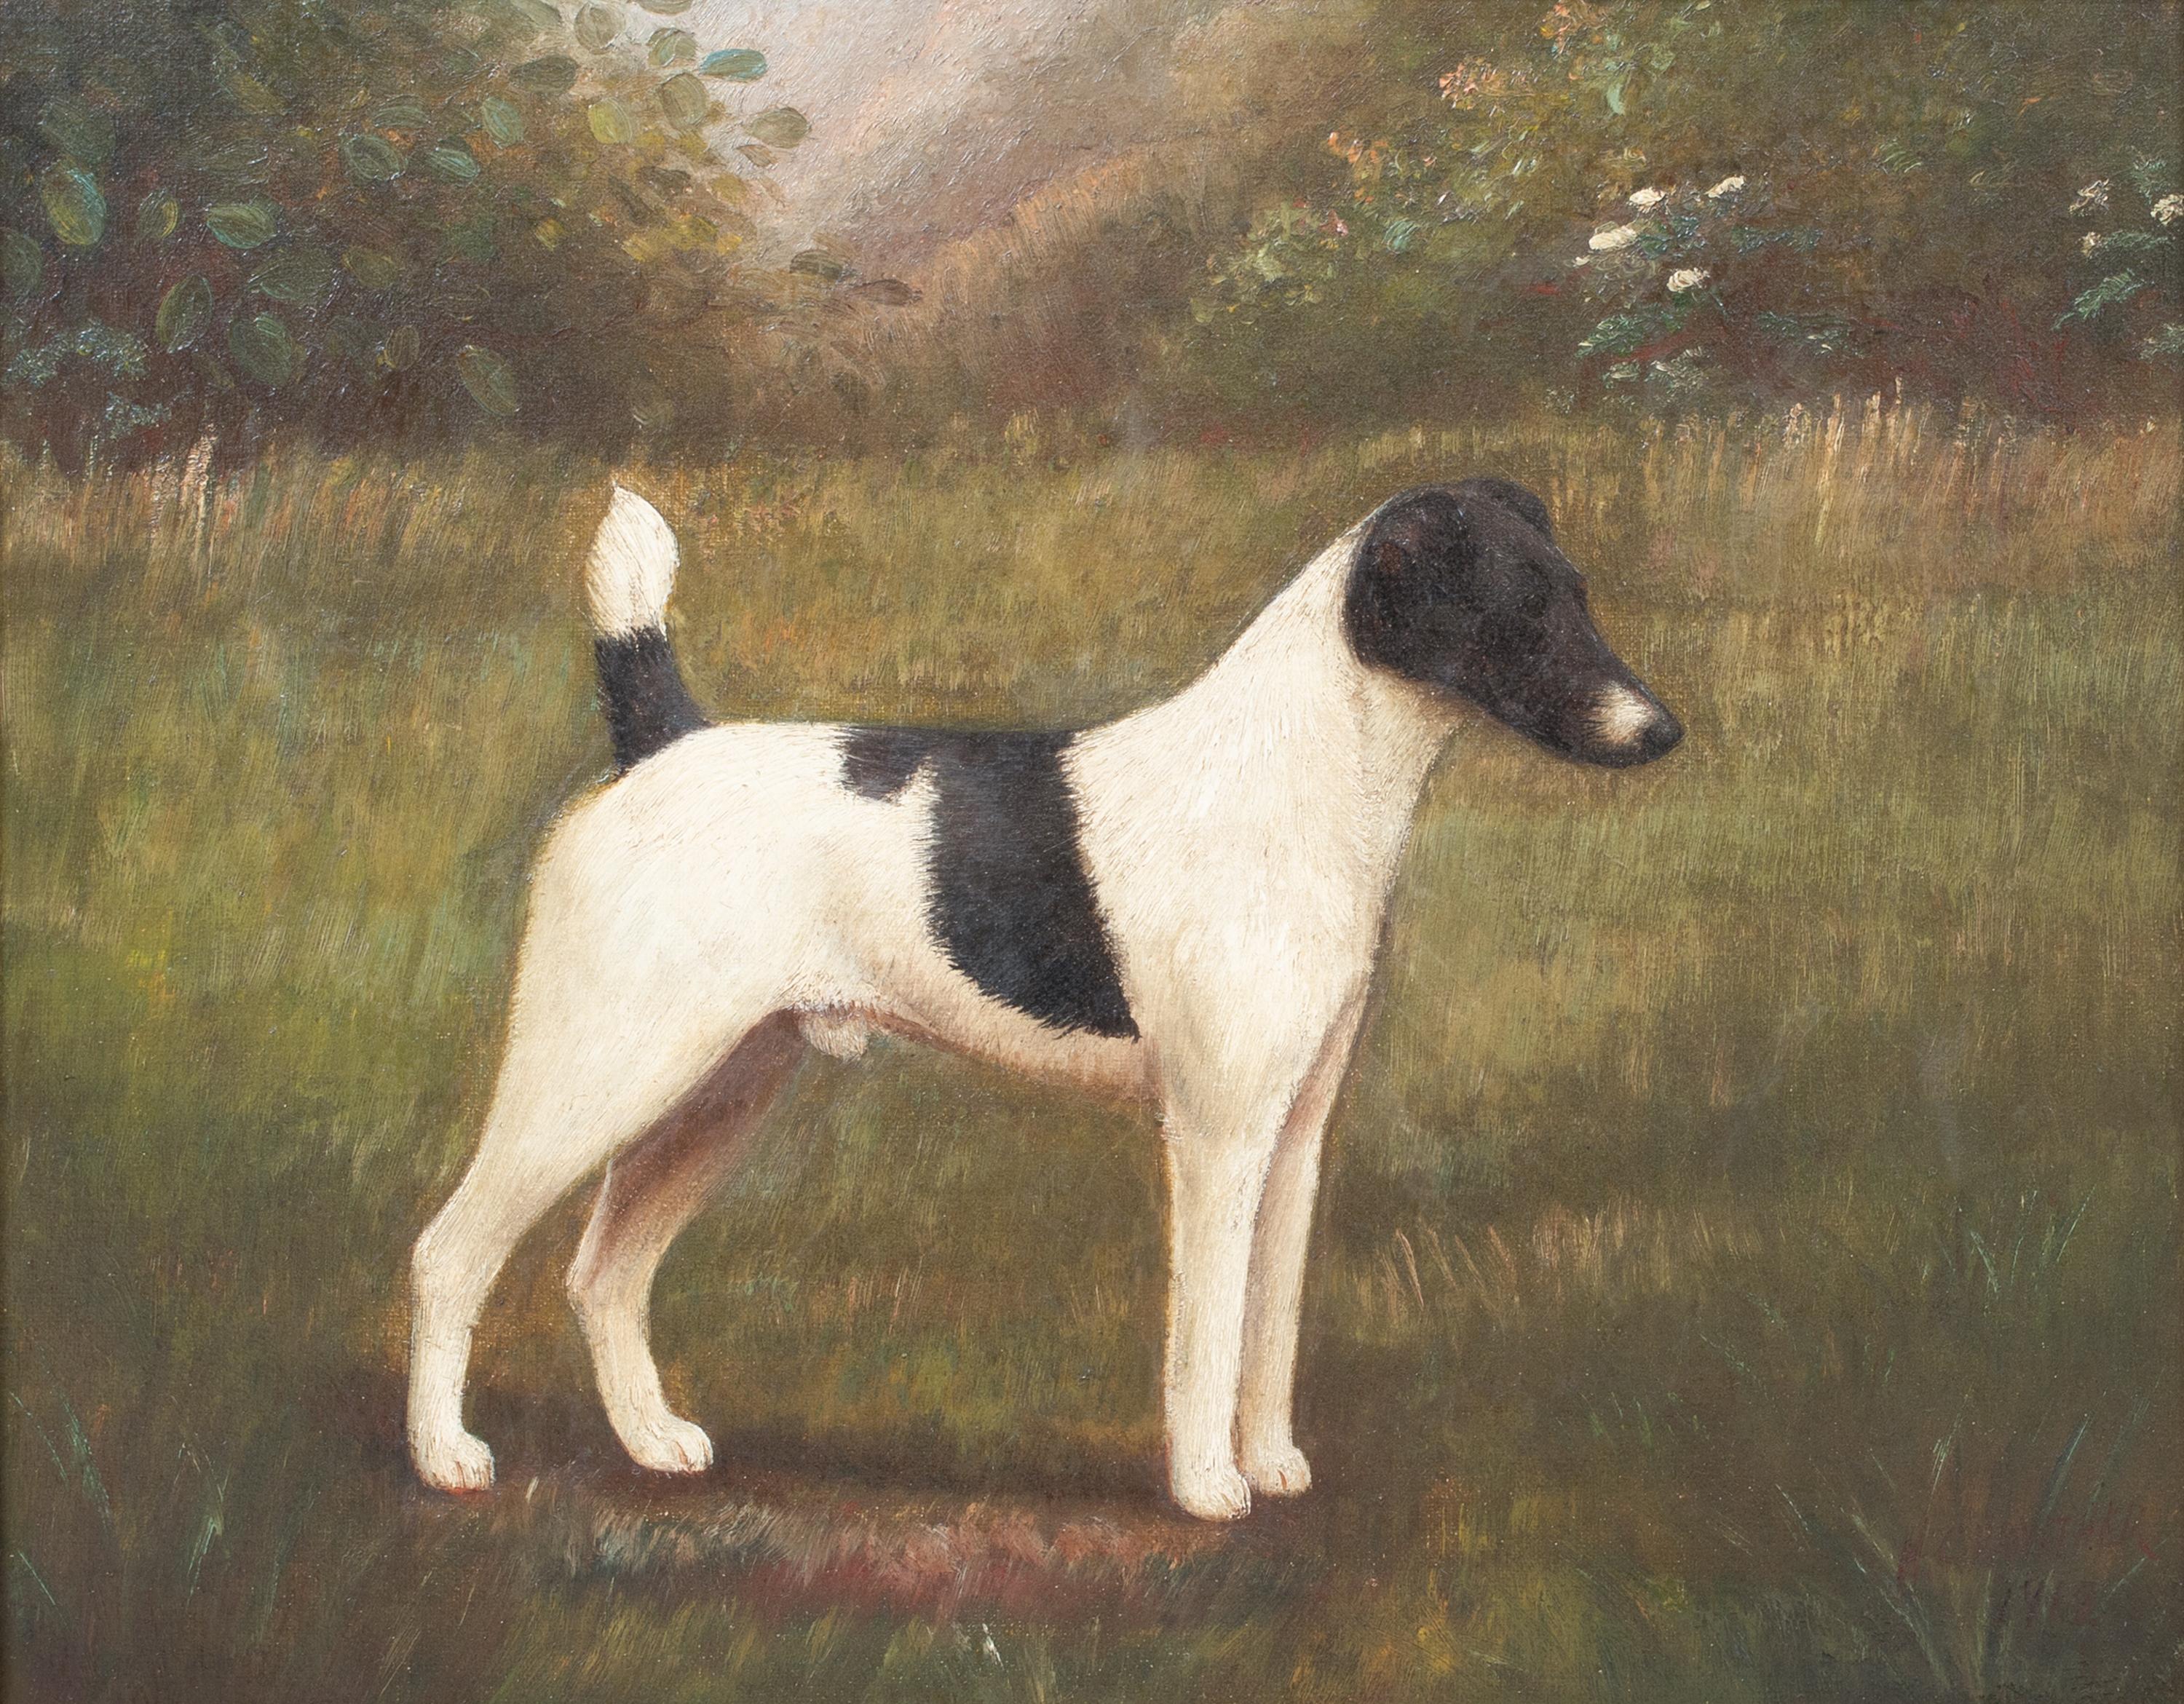 
Portrait Of A Black & White Jack Russell Terrier, 19th Century 

by Henry CROWTHER - 19th Century Dog Painter

19th Century English portrait of a Black and White Jack Russell Terrier, oil on canvas by Henry Crowther. Excellent quality and condition